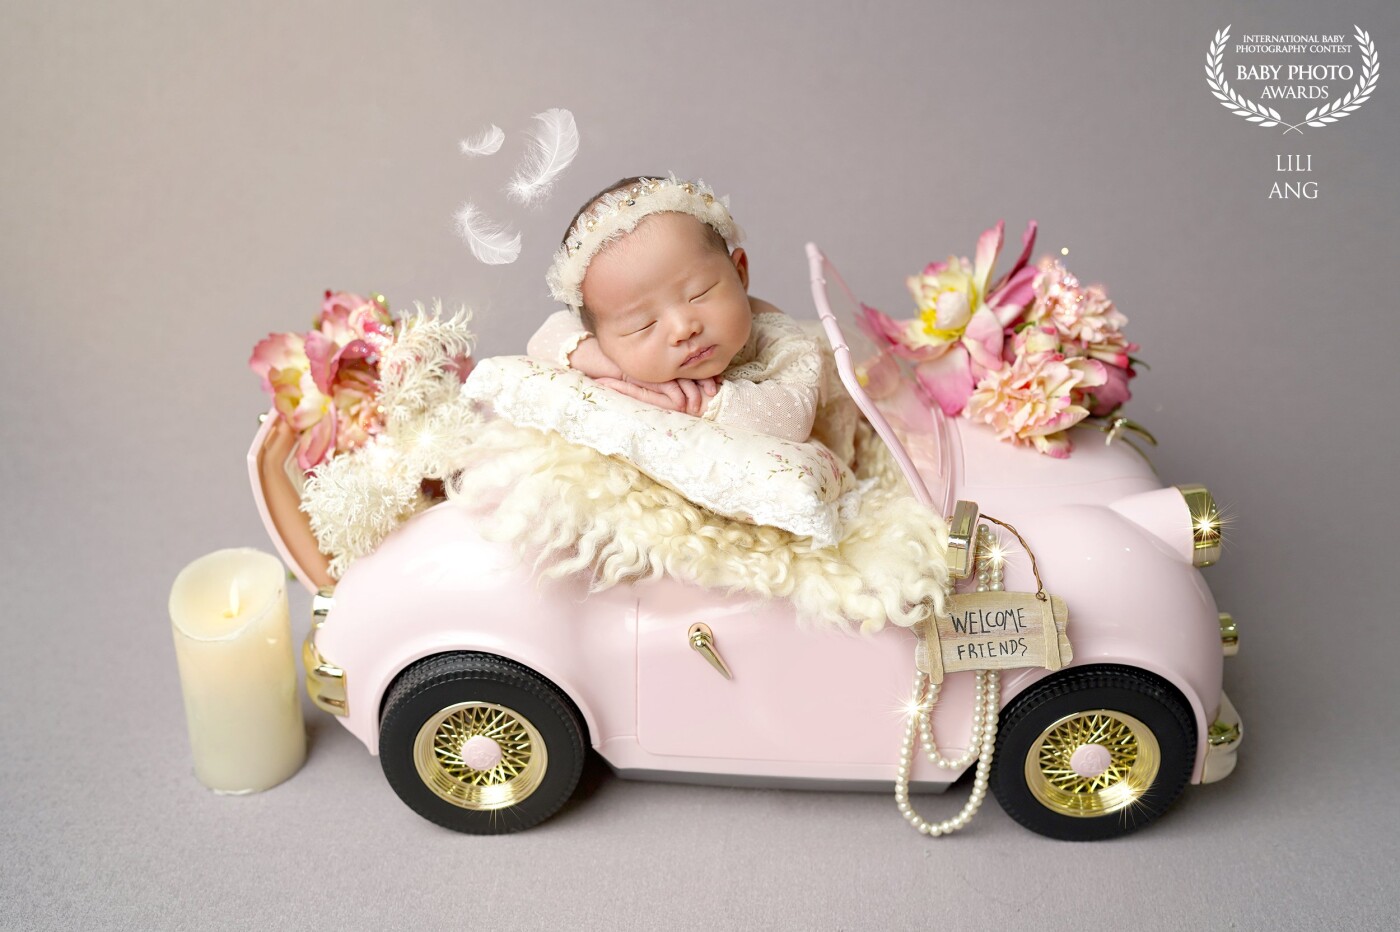 Hello world, this little baby girl is ready to go! Do you want to ride along and having fun together? :)<br />
<br />
Yes. This is the best prop i bought so far for my newborn babies. And who know, after year by years this beautiful car become our signature.  As the first in my country, it's become client's most wanted theme ever. <br />
Thanks @babyphotoawards it's an honour to get the award. Love ya!  ~Lili Ang~